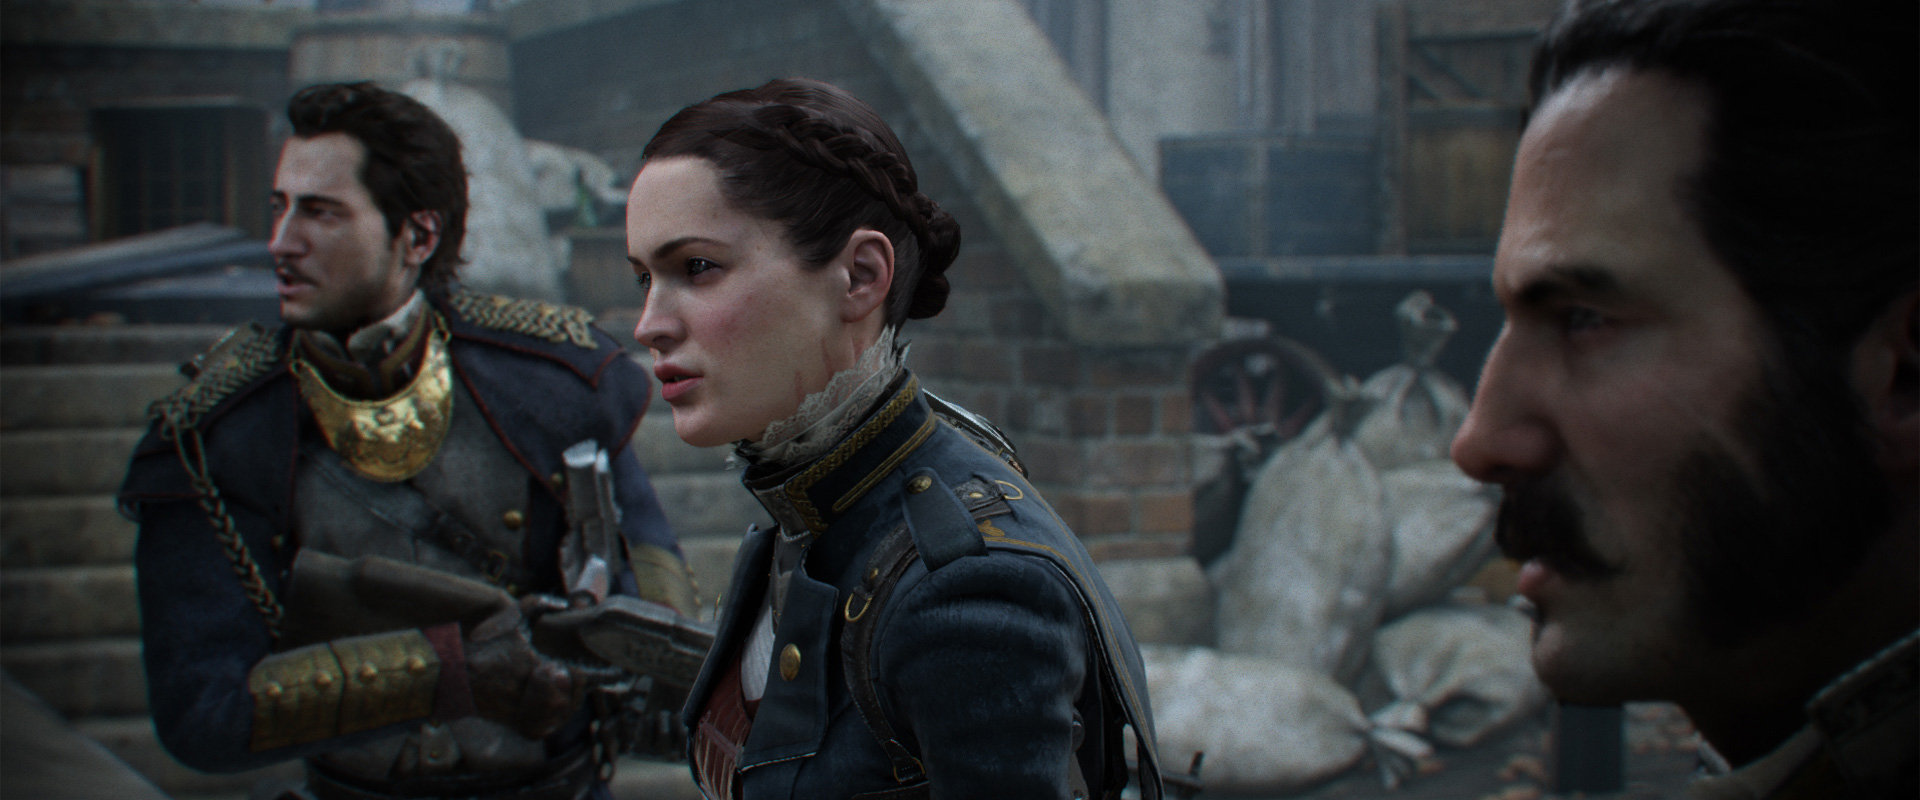 High Resolution Wallpaper | The Order: 1886 1920x800 px